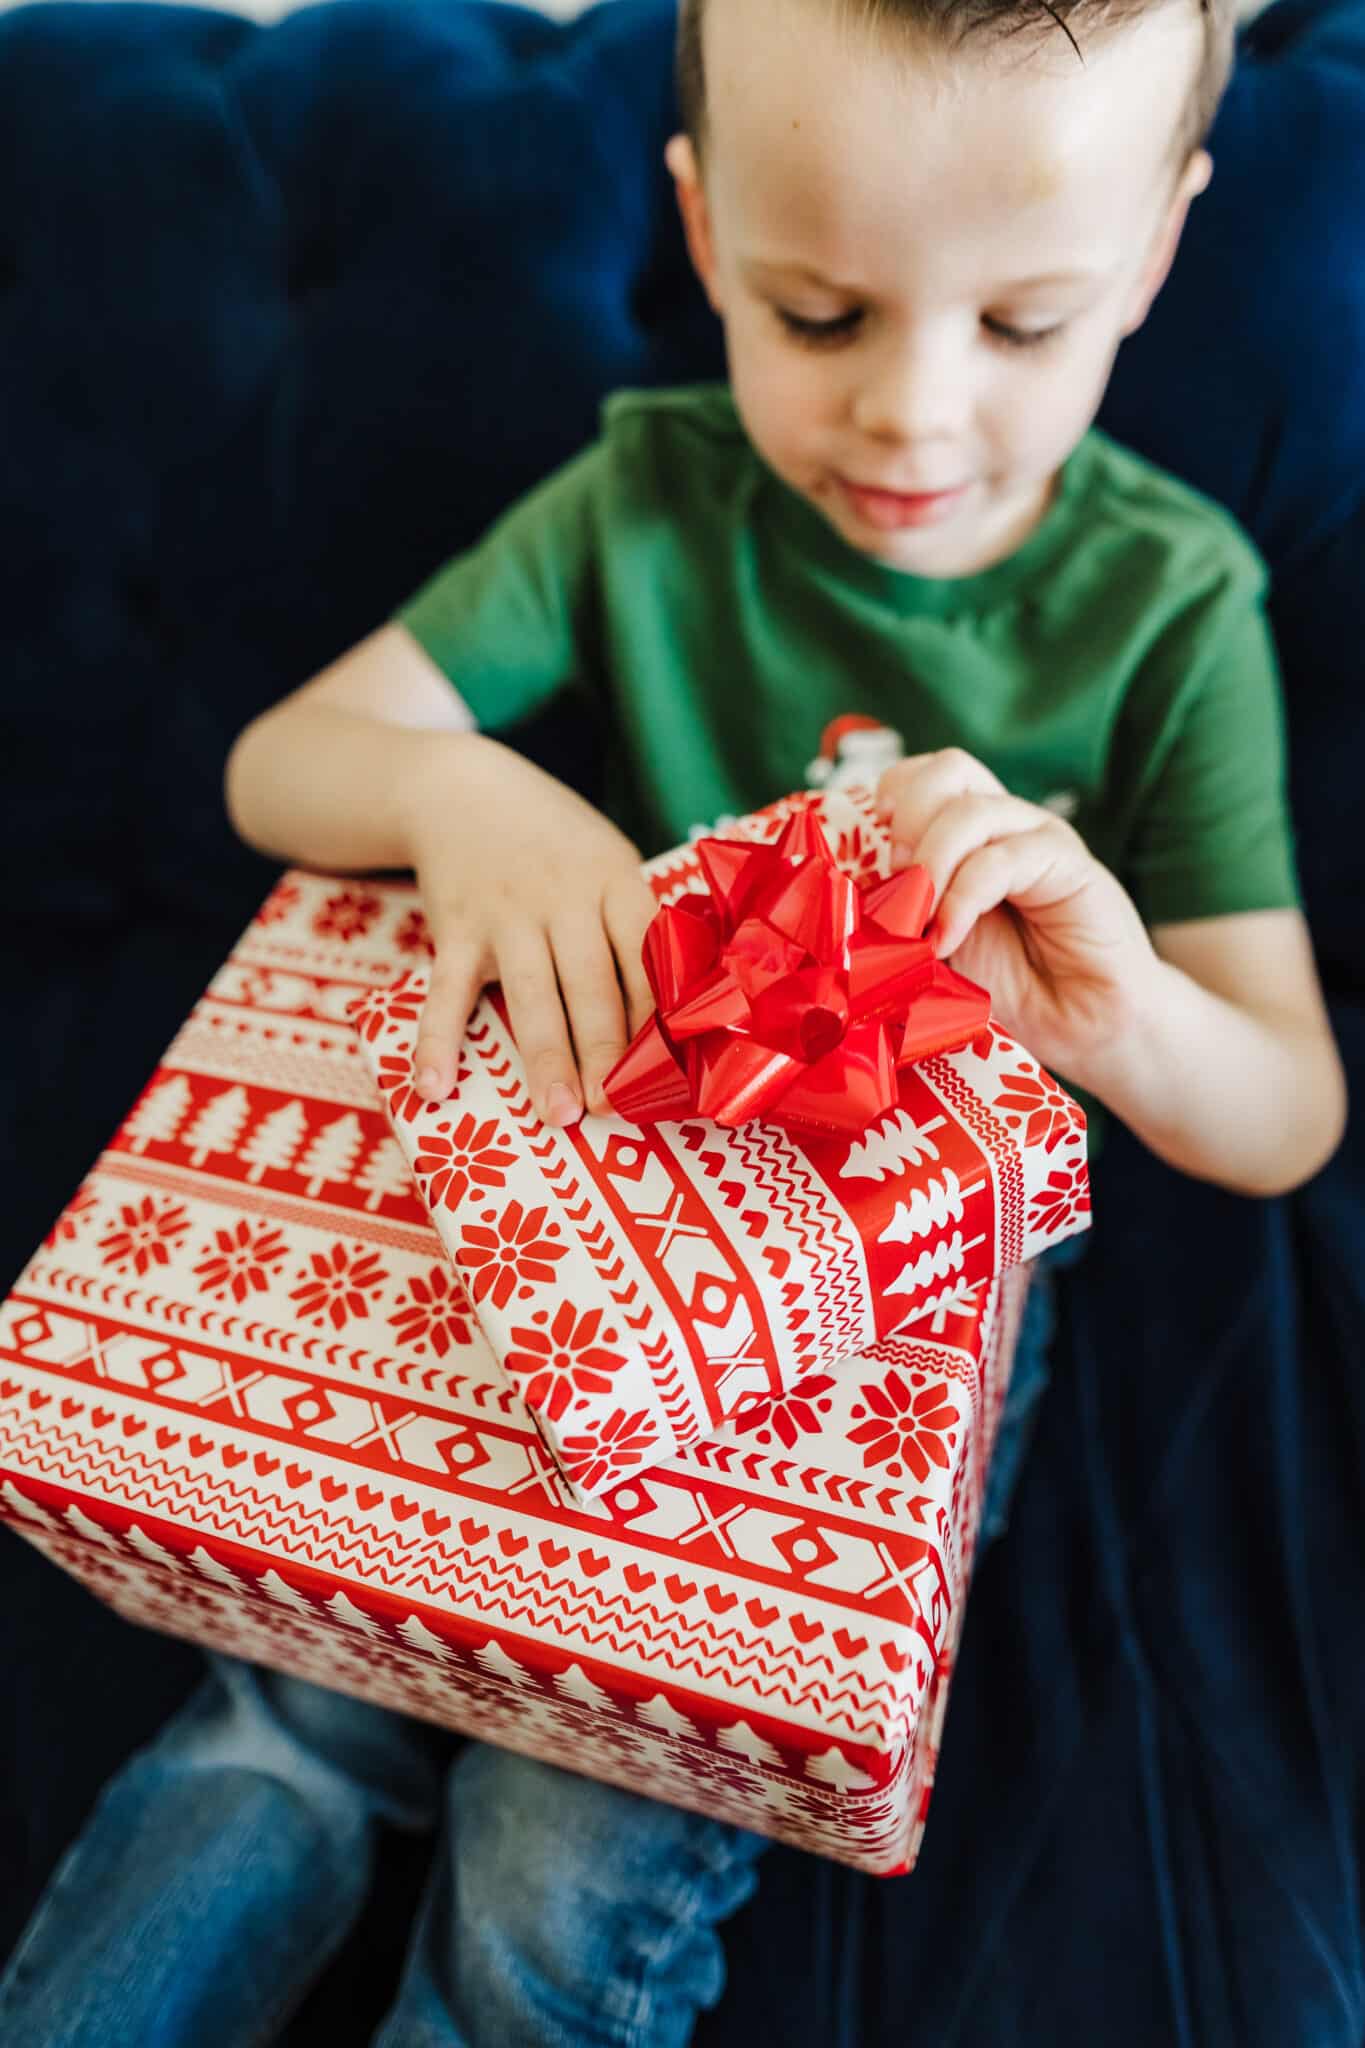 Best Christmas Gifts for a 4-Year-Old